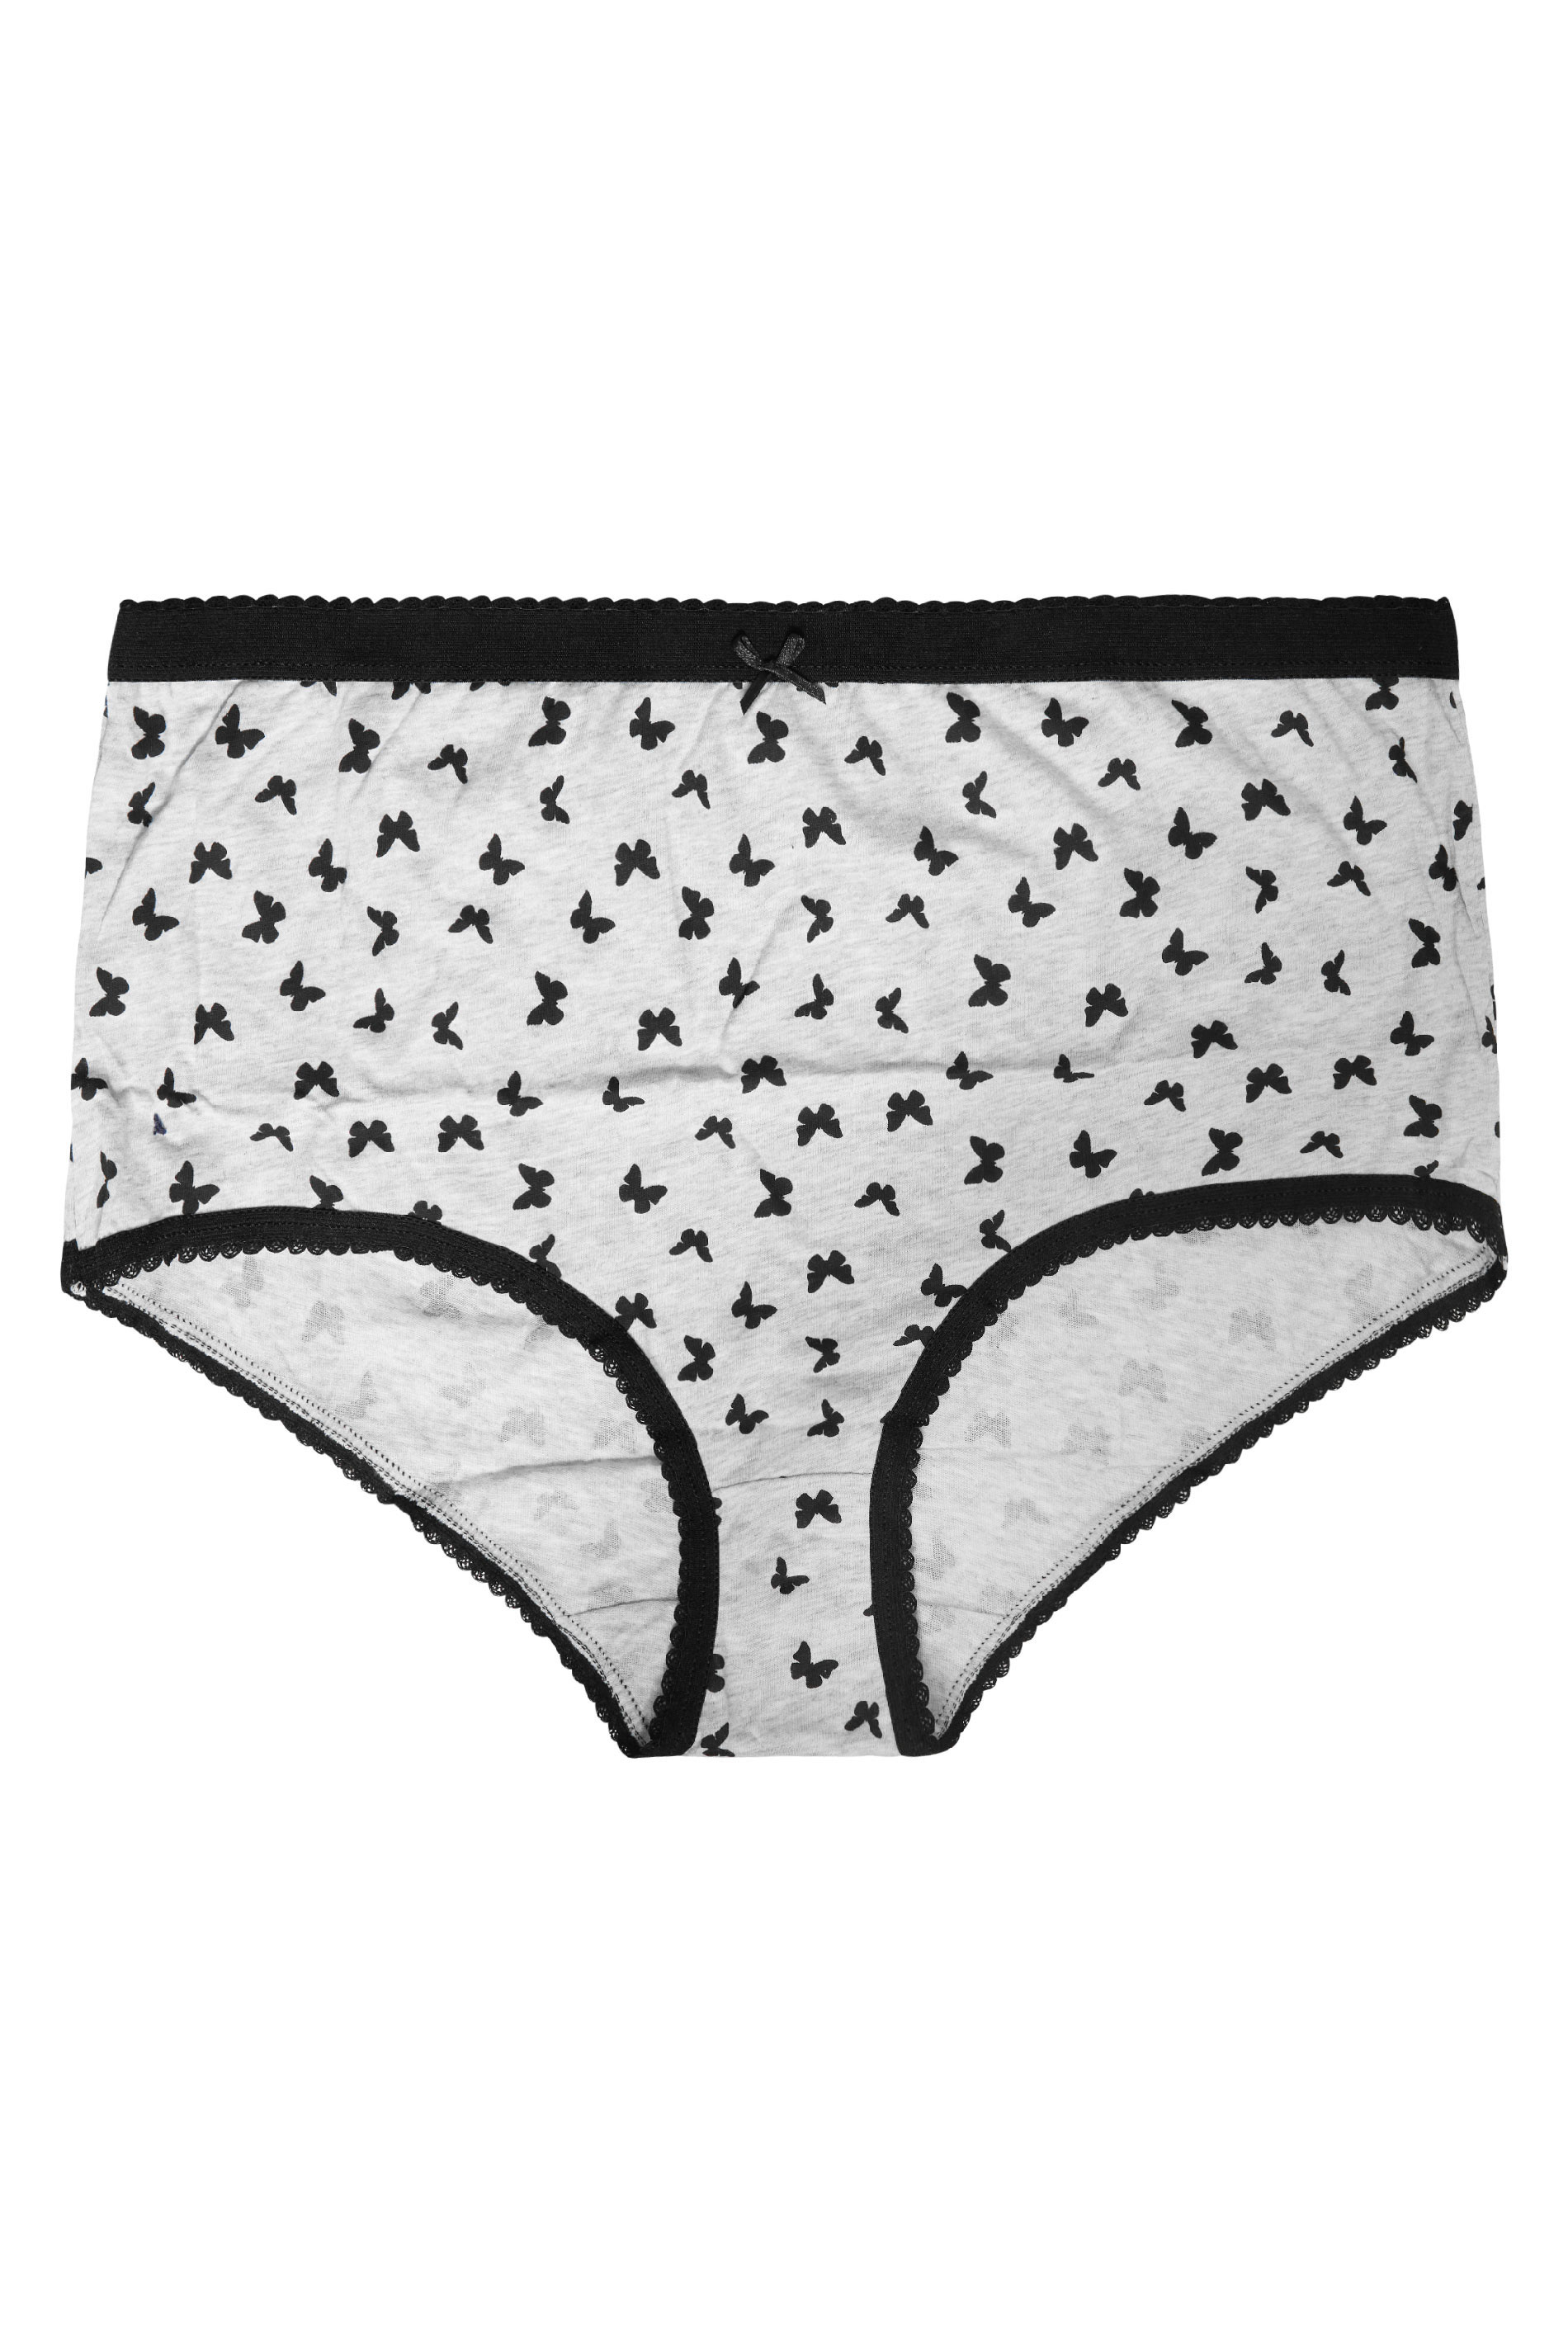 5 PACK Black & White Butterfly Print High Waisted Full Briefs | Yours Clothing 3